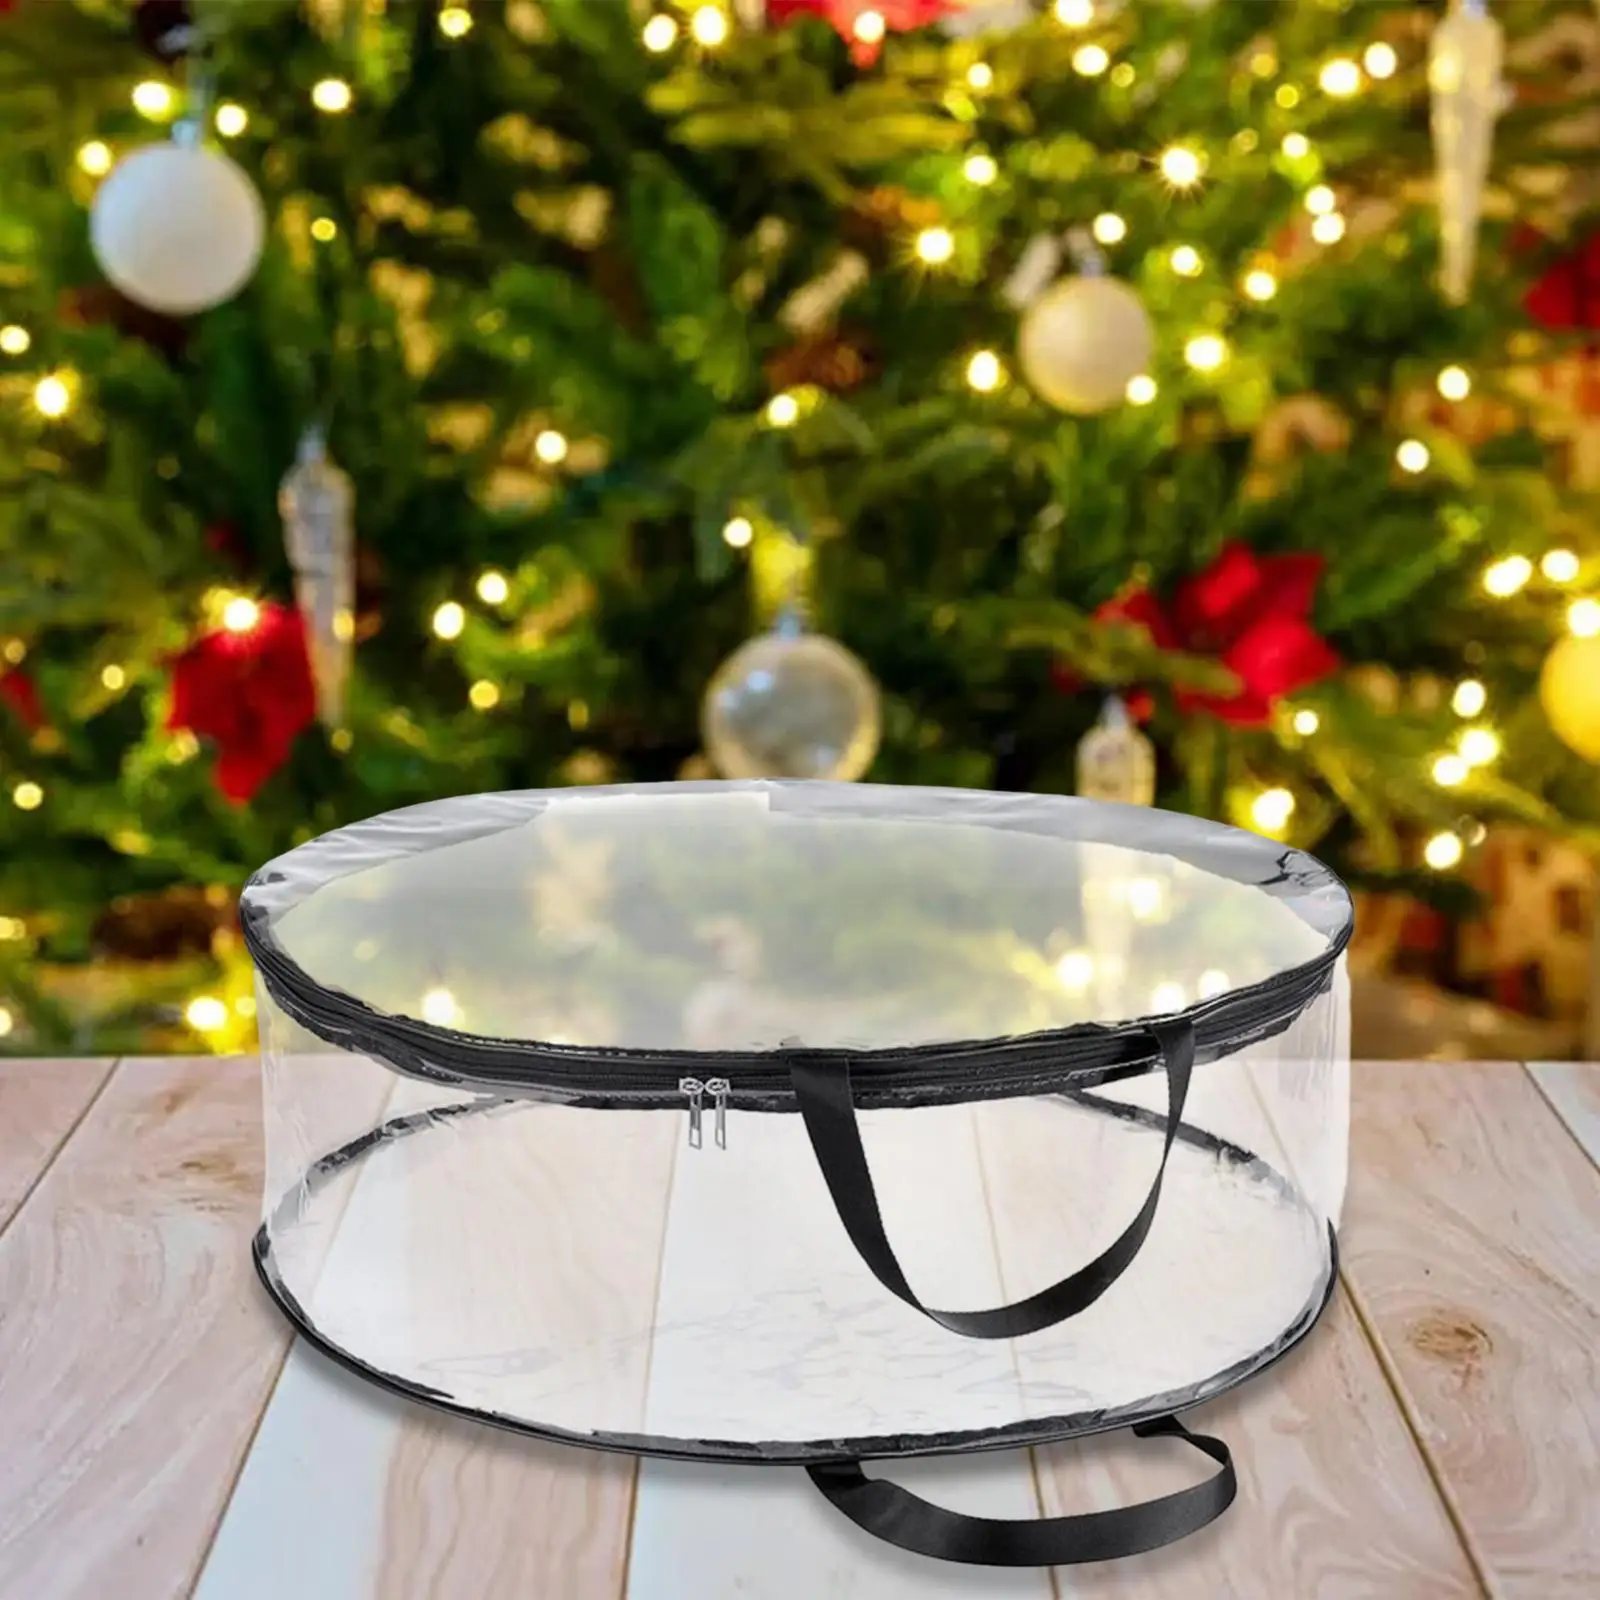 Christmas Wreath Storage Bag Christmas Wreath Storage Transparent Christmas Tree Bag Container for Easter Green Plants